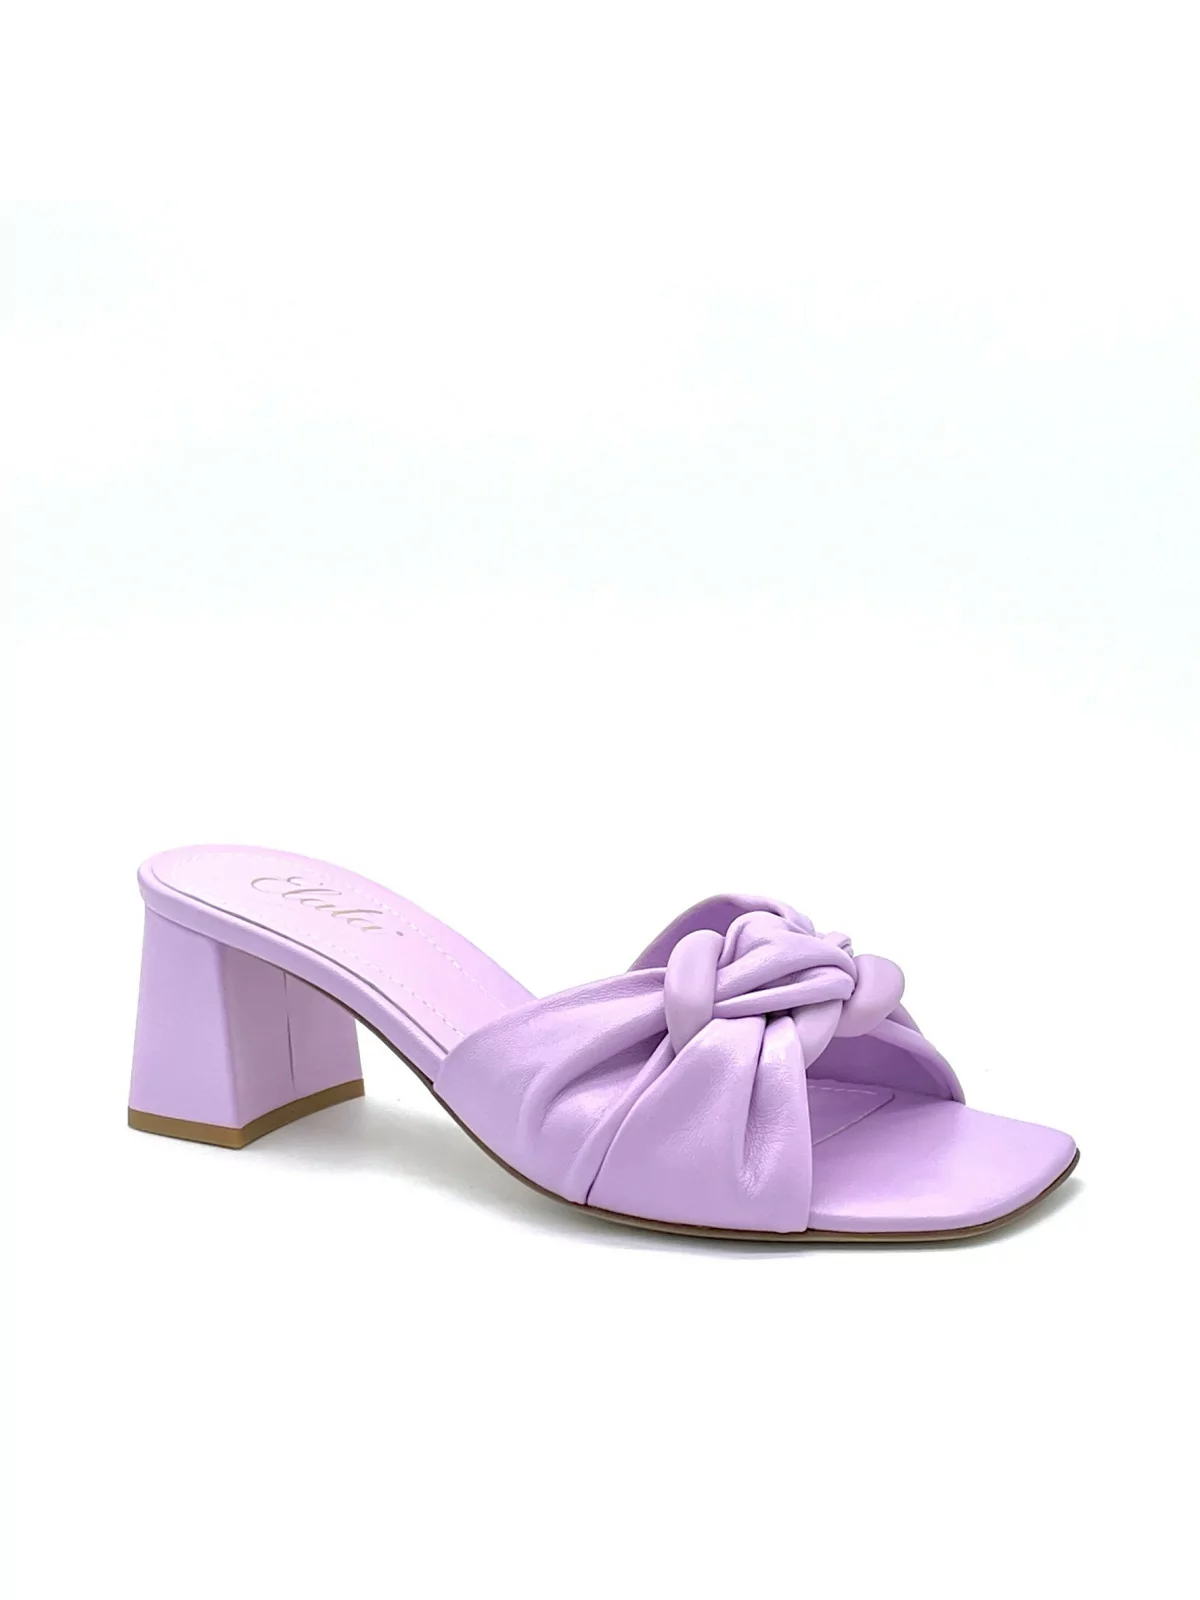 Lavender leather mule with matching accessory. Leather lining. Leather sole. 5,5